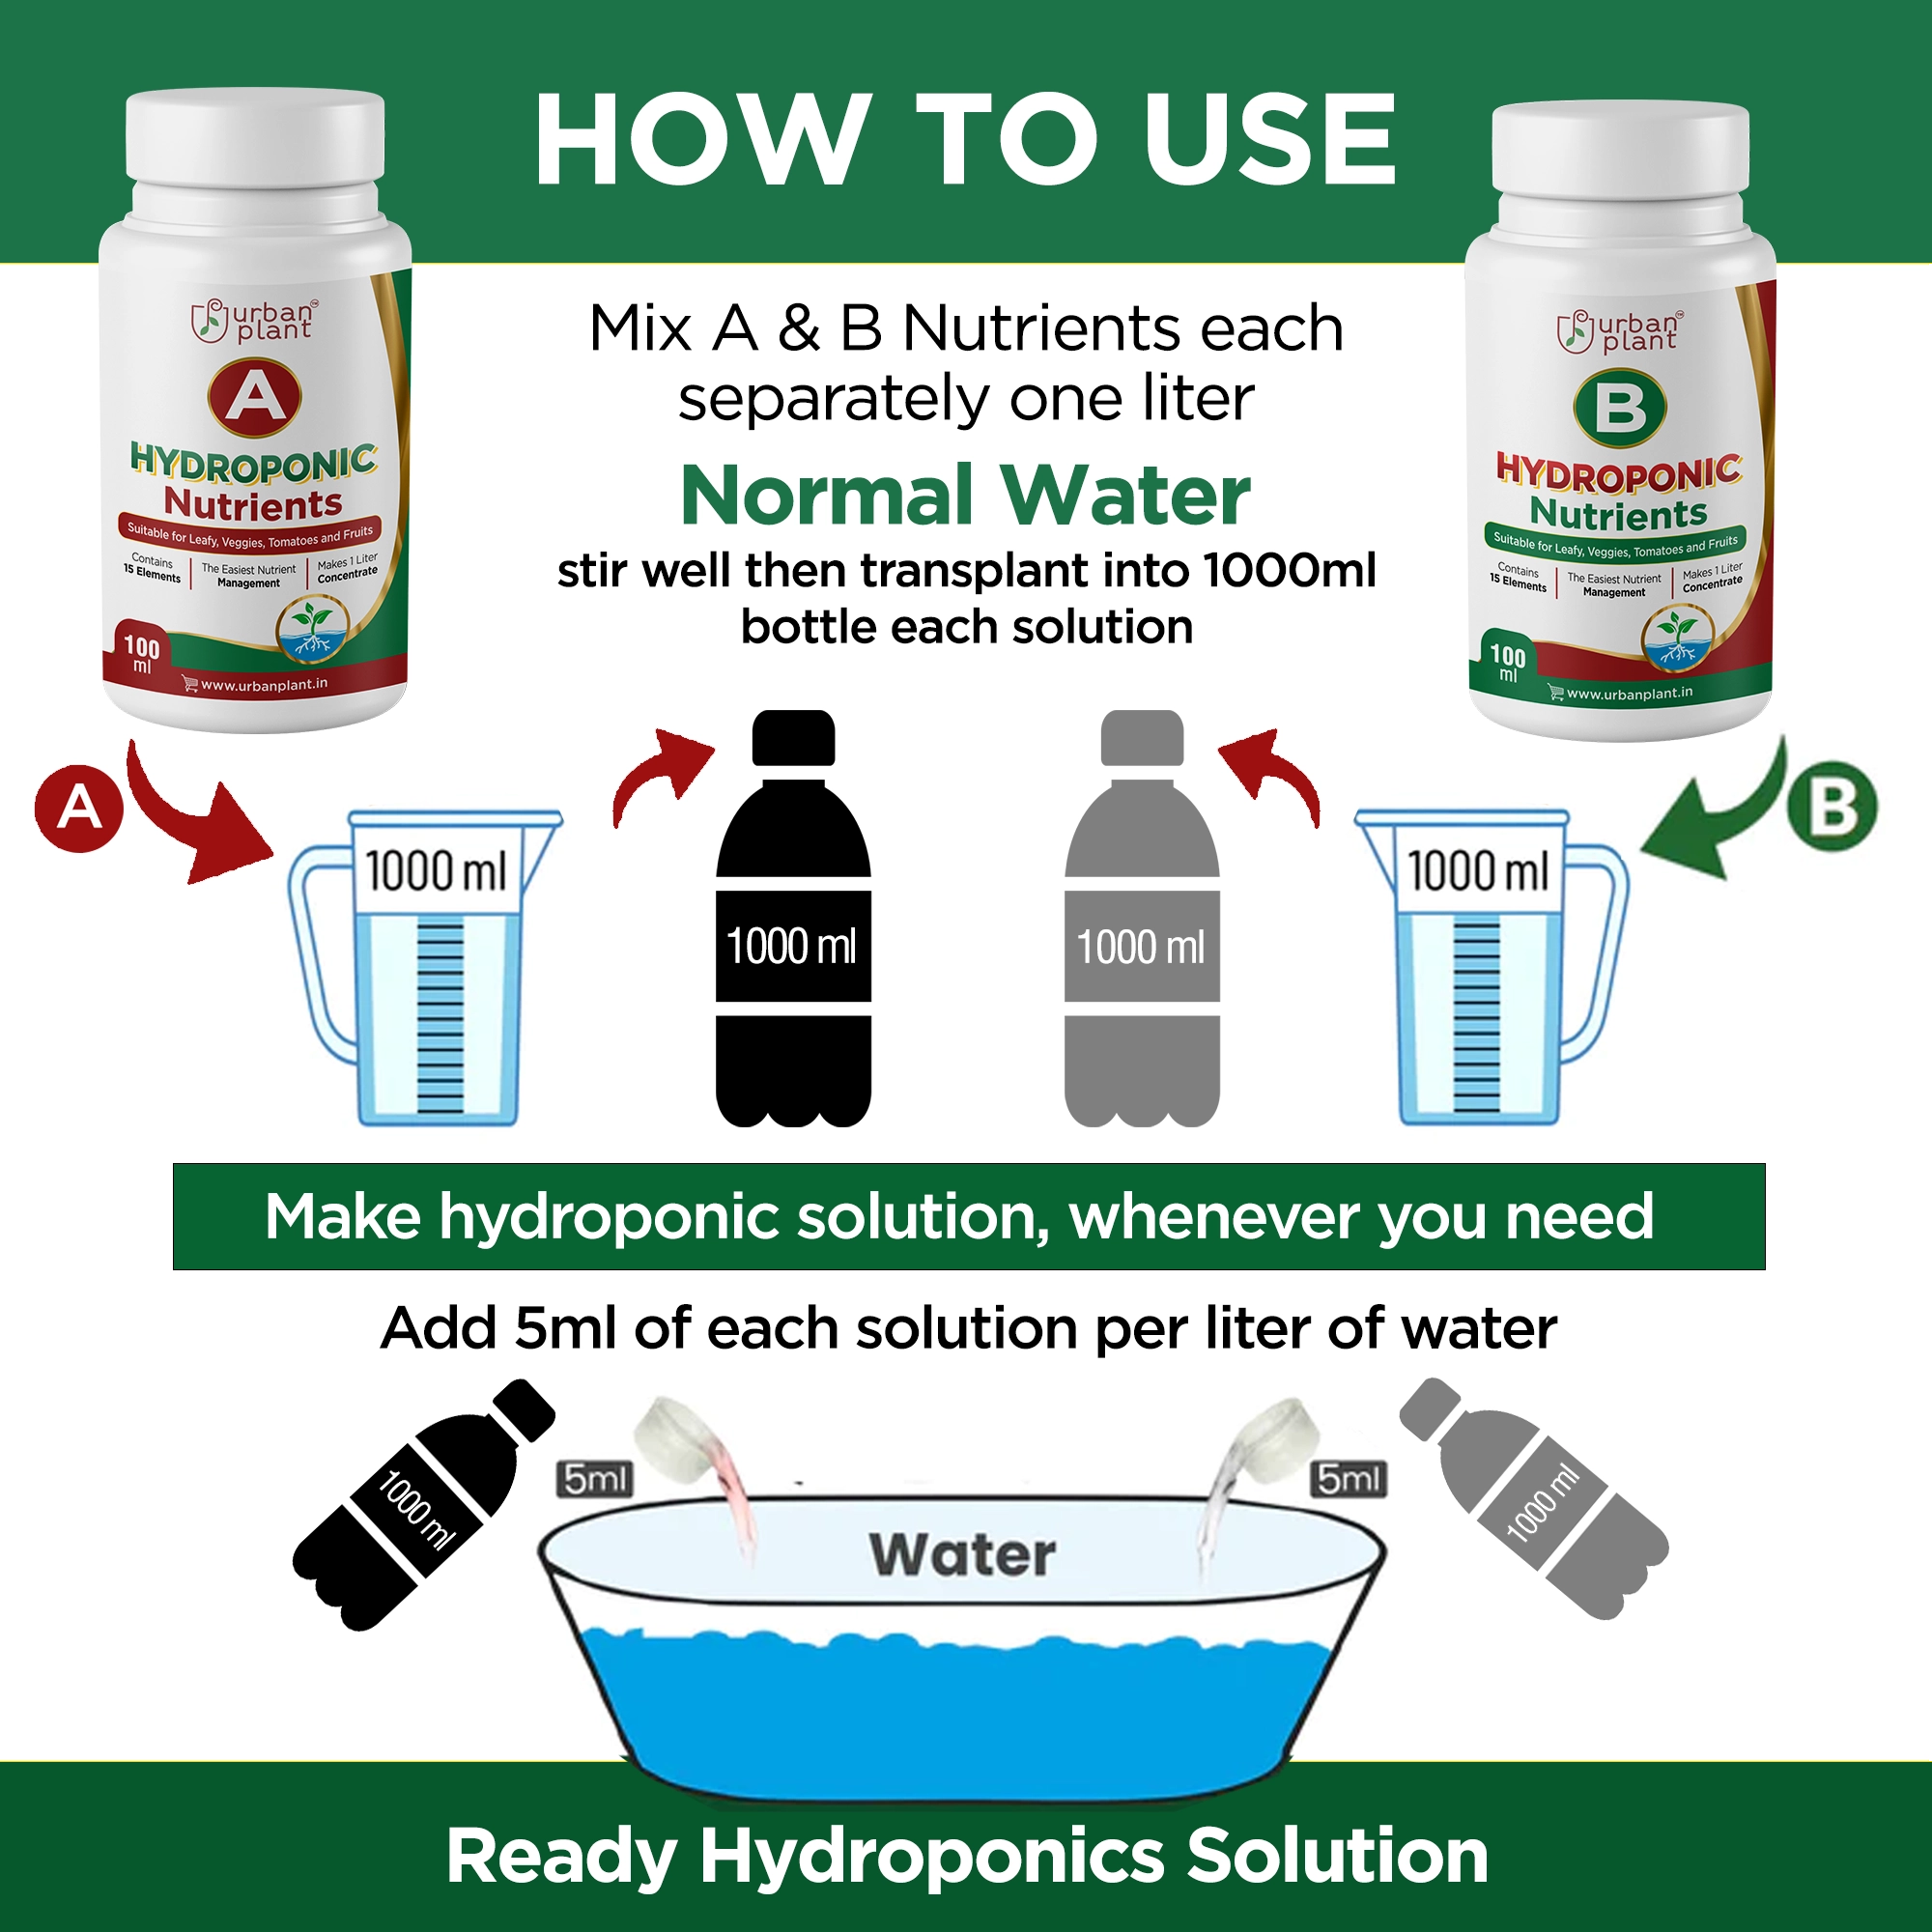 Hydroponic A&B Nutrients - 15 Essential Elements for Veggies, Leafy Greens, Tomatoes and Fruits 200ML Plant Diet Urban Plant 